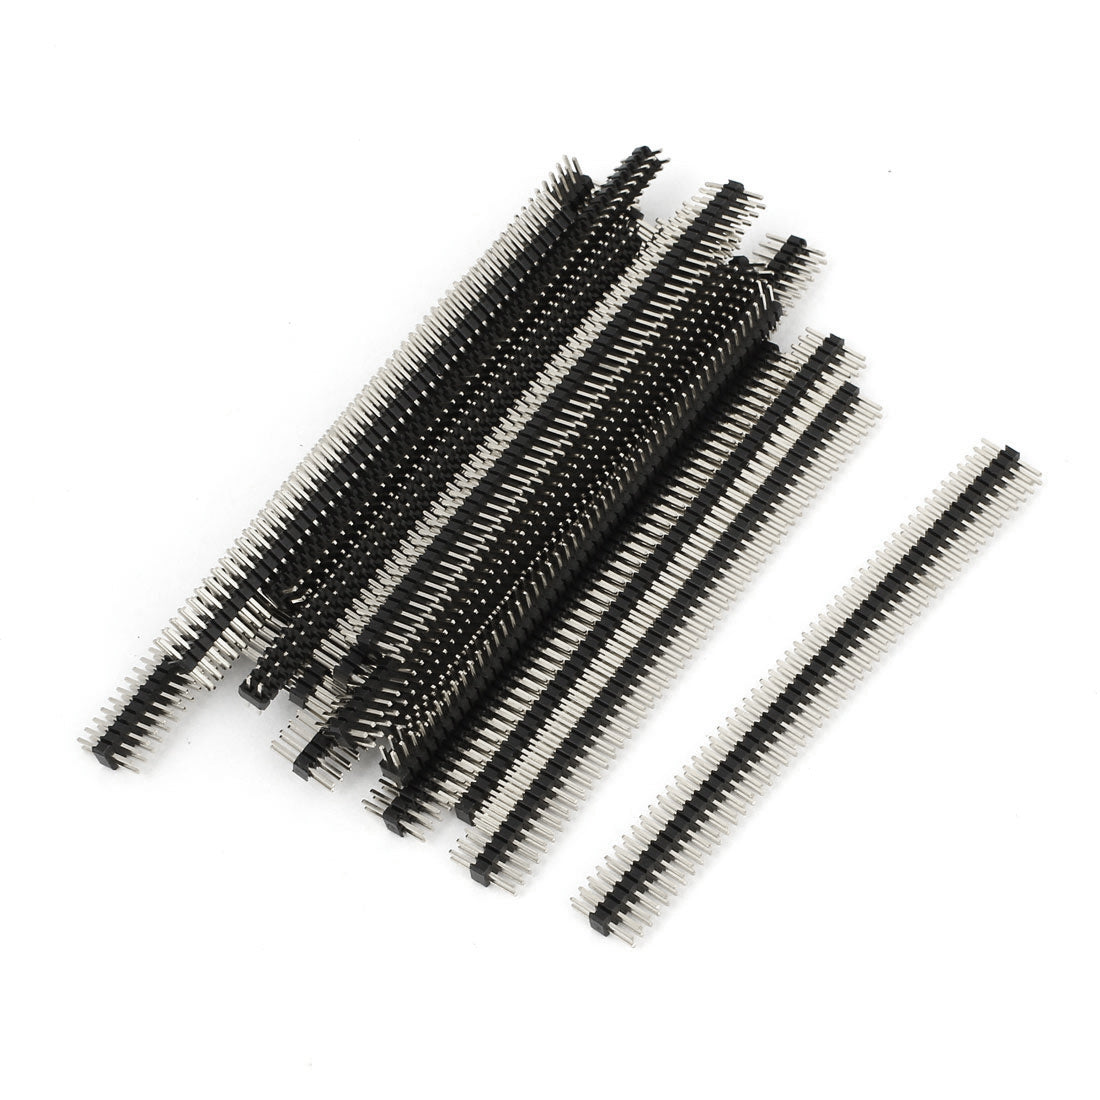 uxcell Uxcell 20pcs 50 Way Double Row Straight Pin Male Header Strip 1.27mm Pitch